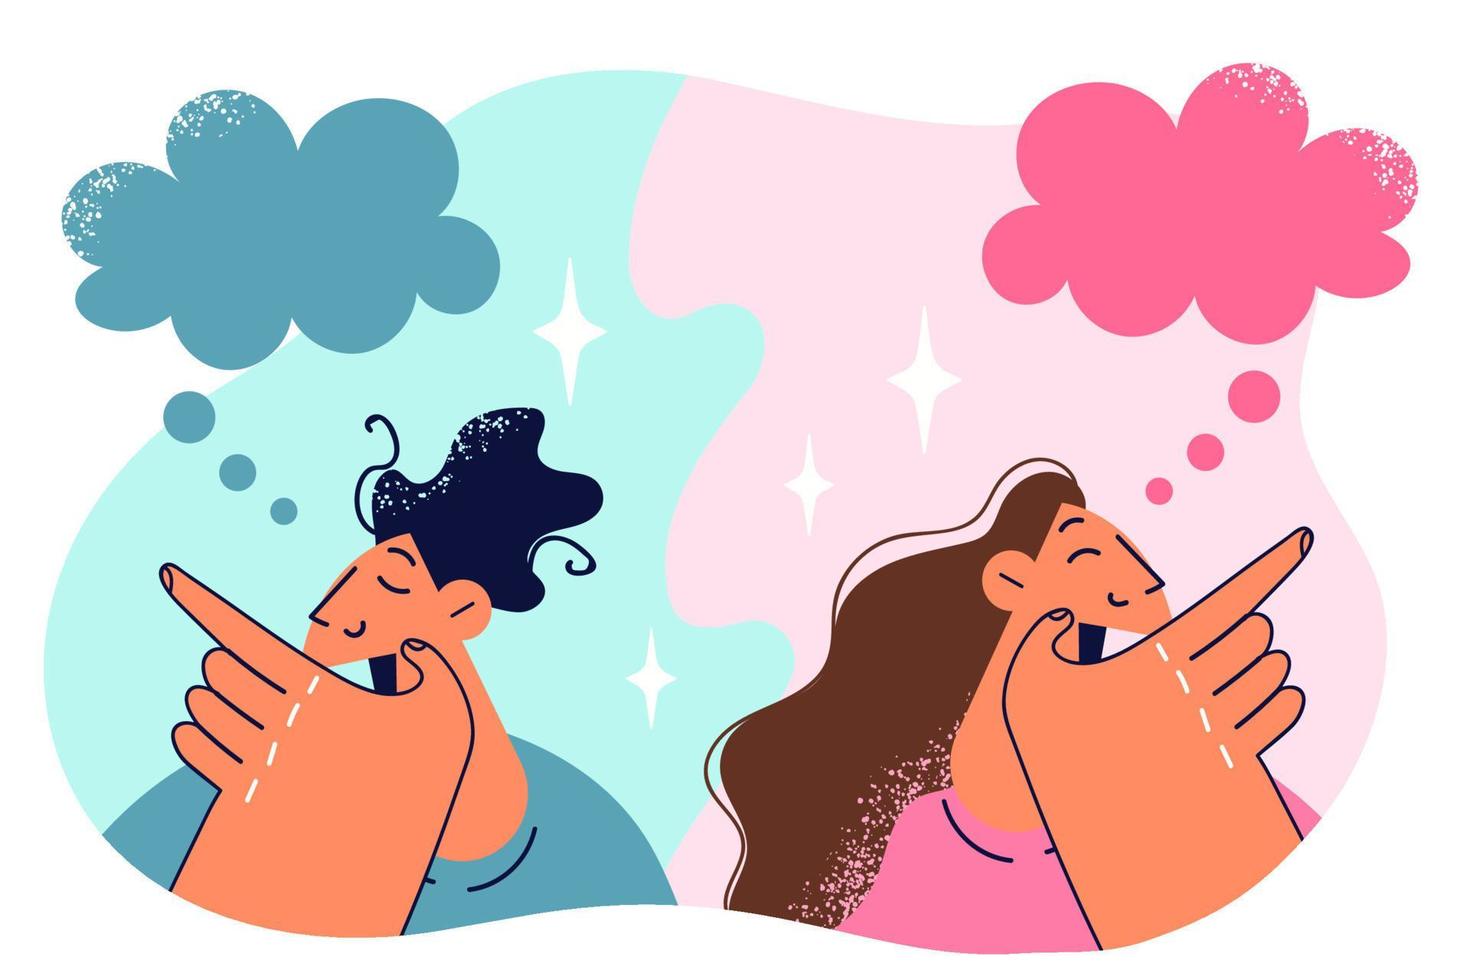 Thoughtful man and woman touching chin thinking together on one task. Young thoughtful couple with dialogue bubbles symbolizing communication and exchange of opinions for problem solving vector